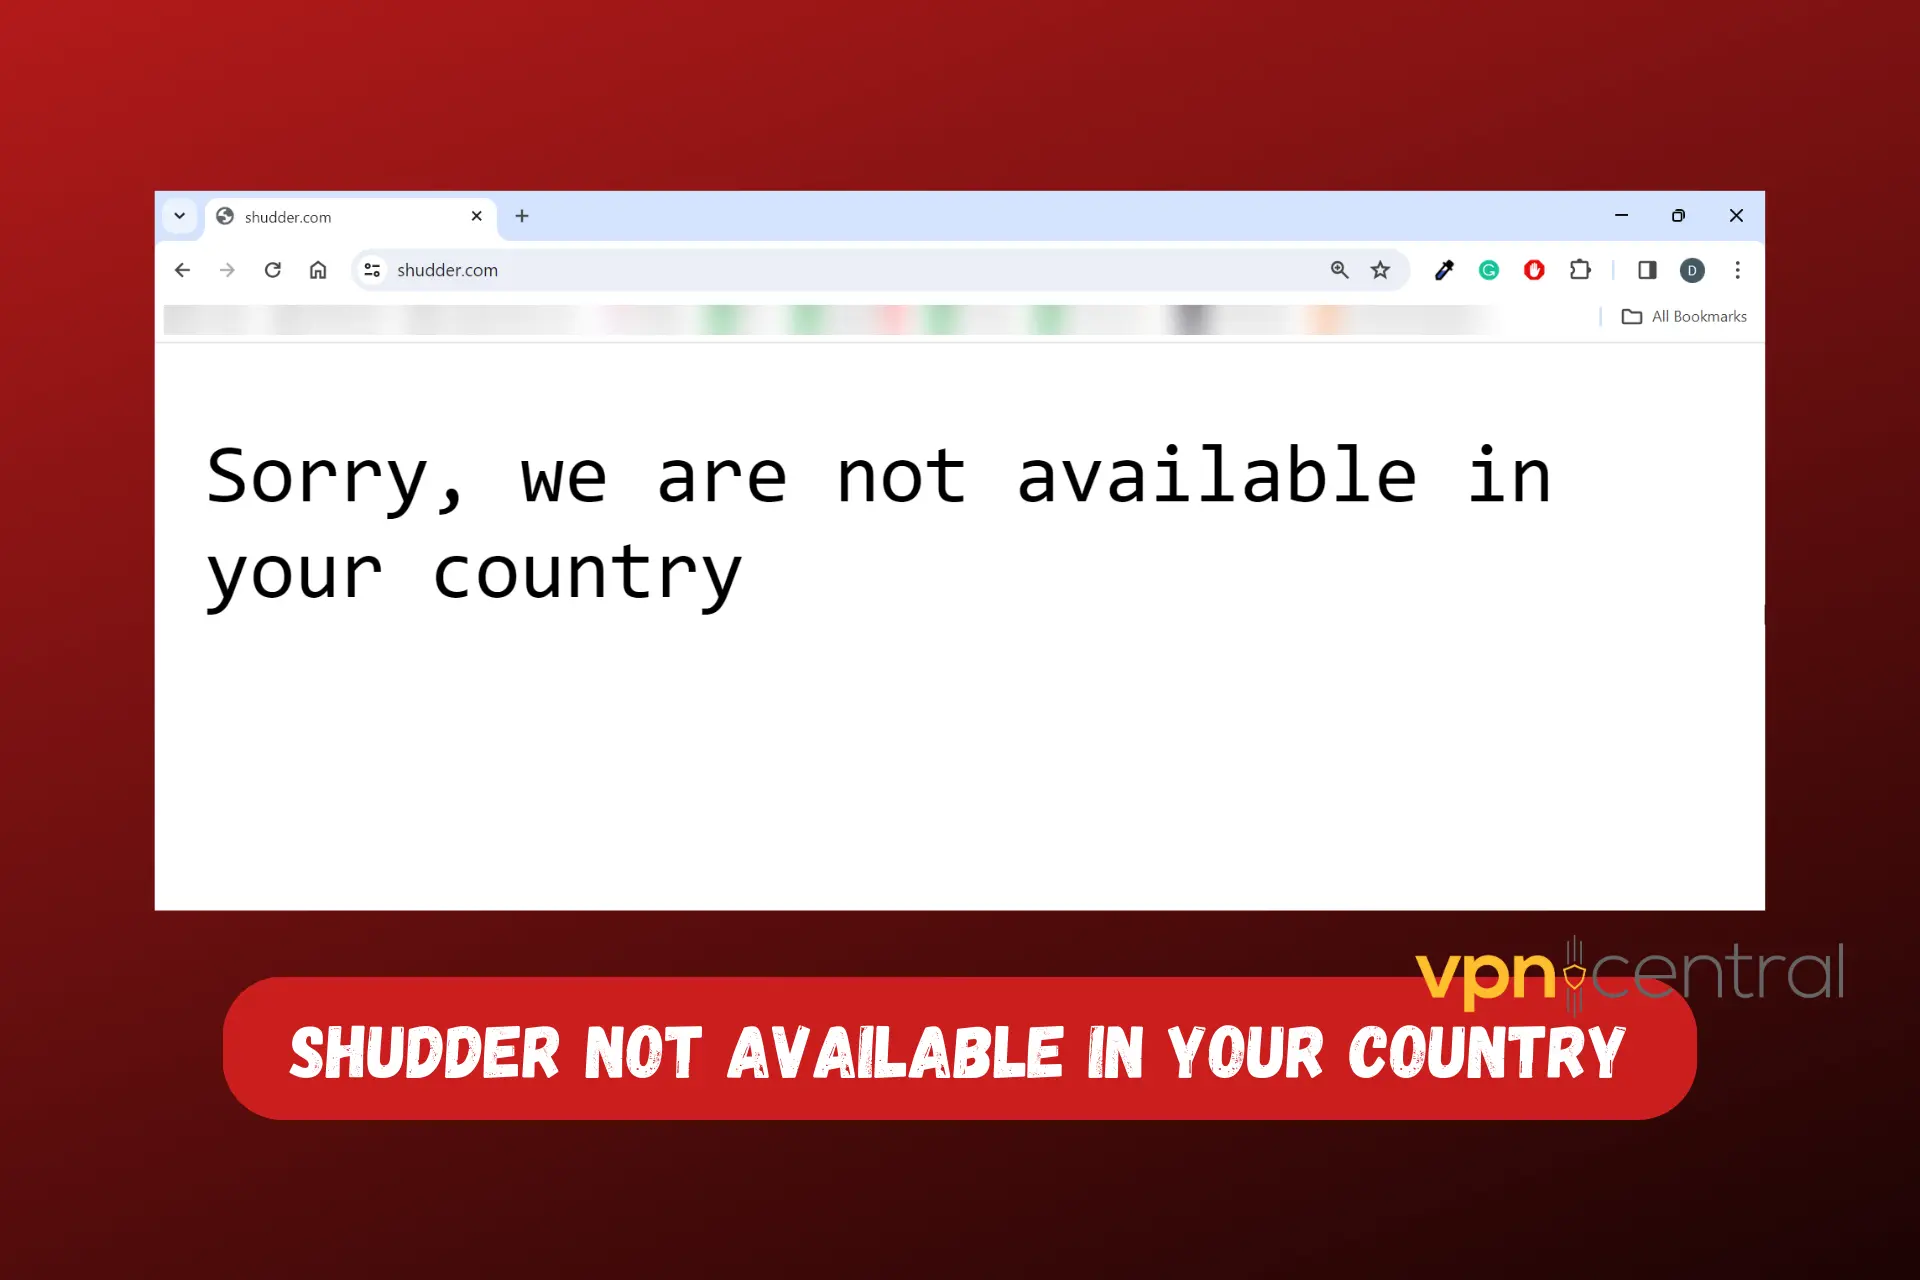 SHUDDER NOT AVAILABLE IN YOUR COUNTRY